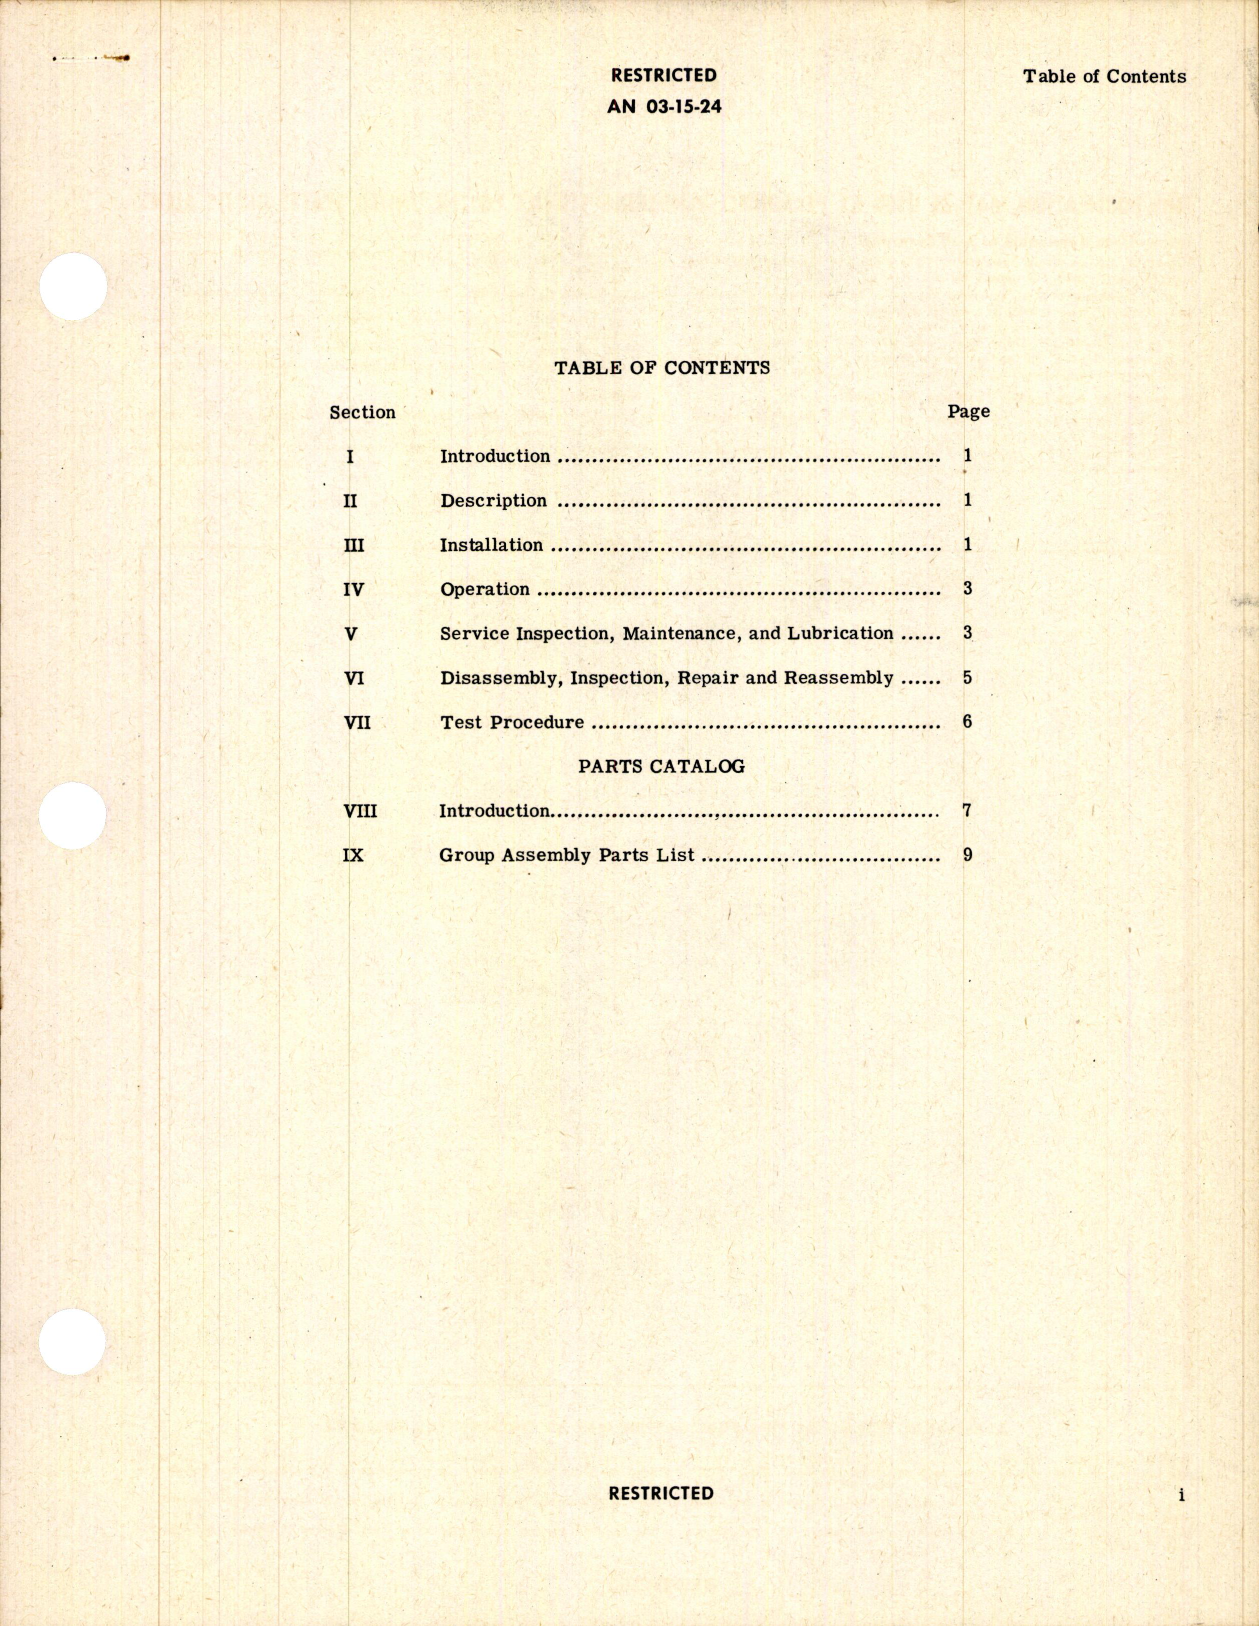 Sample page 3 from AirCorps Library document: Parts Catalog for Oil Dilution Solenoid Valve